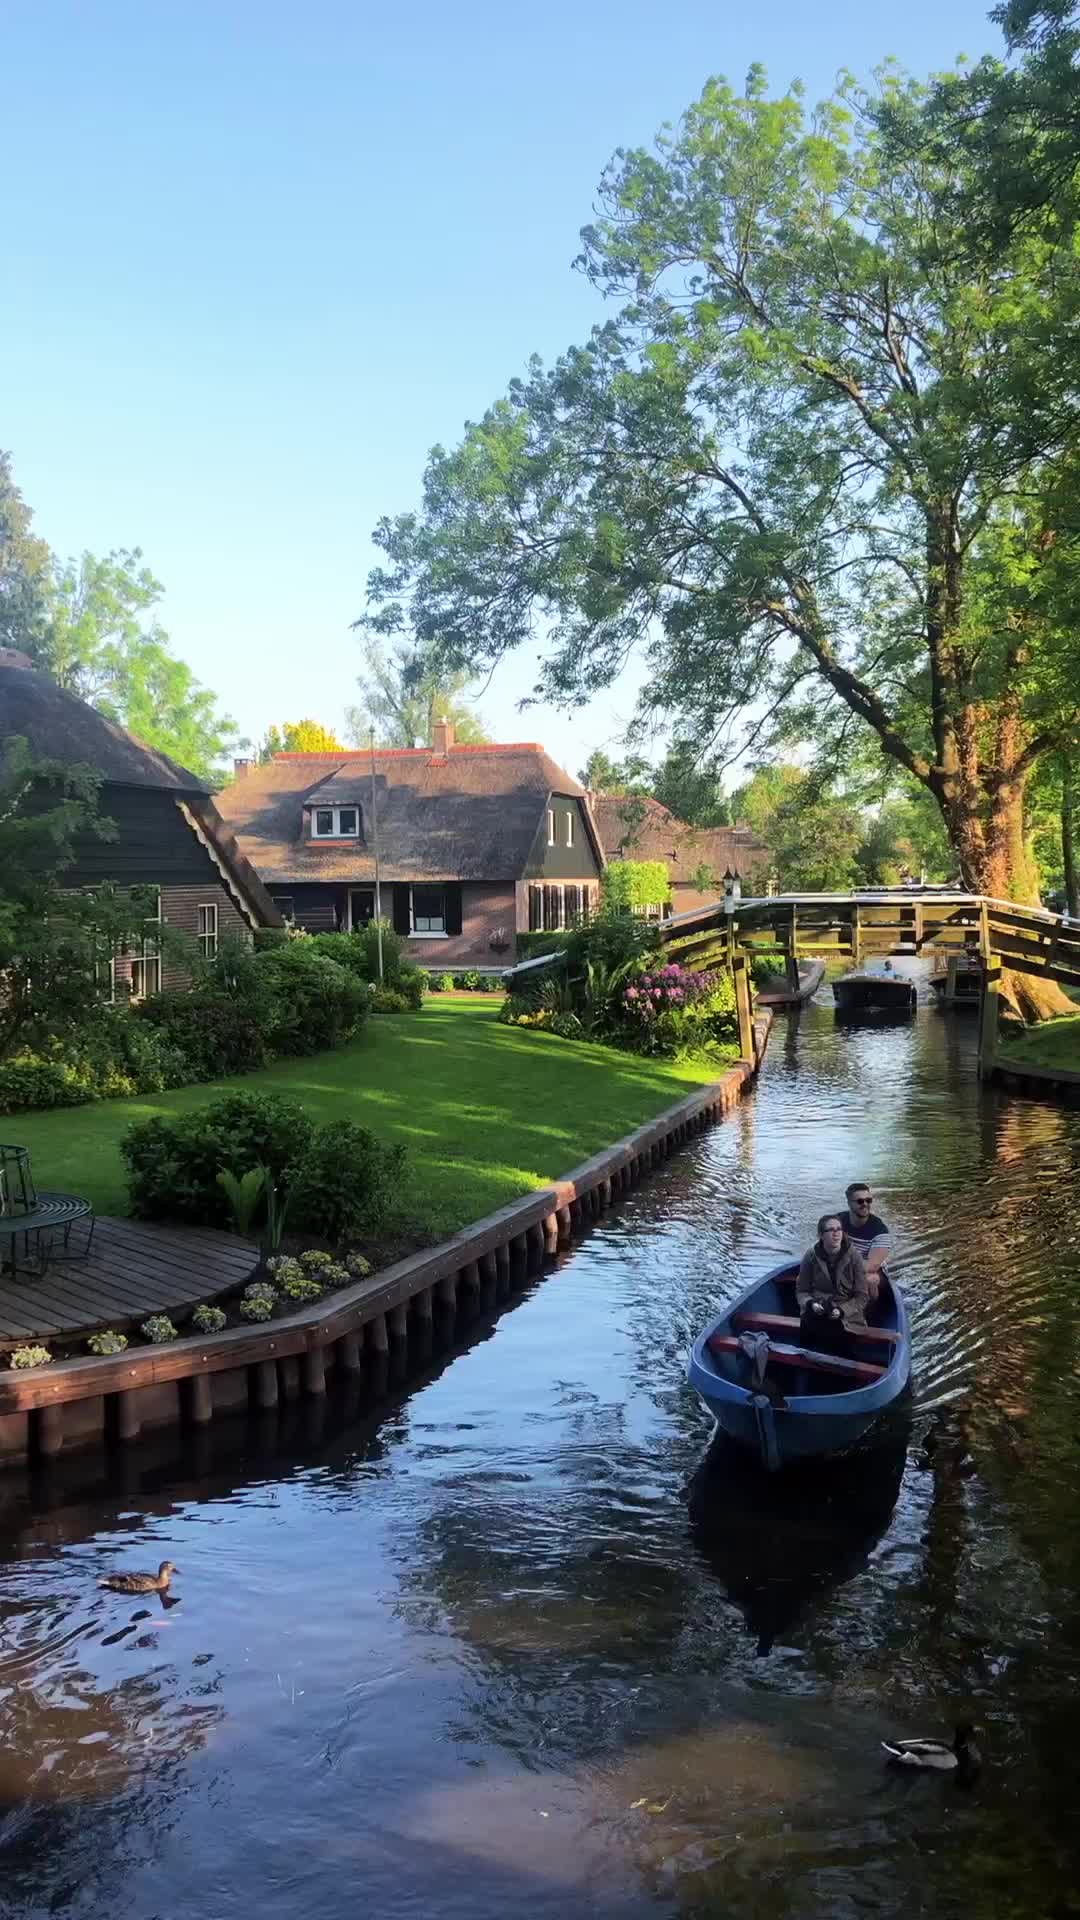 Discover Giethoorn: The Venice of the Netherlands